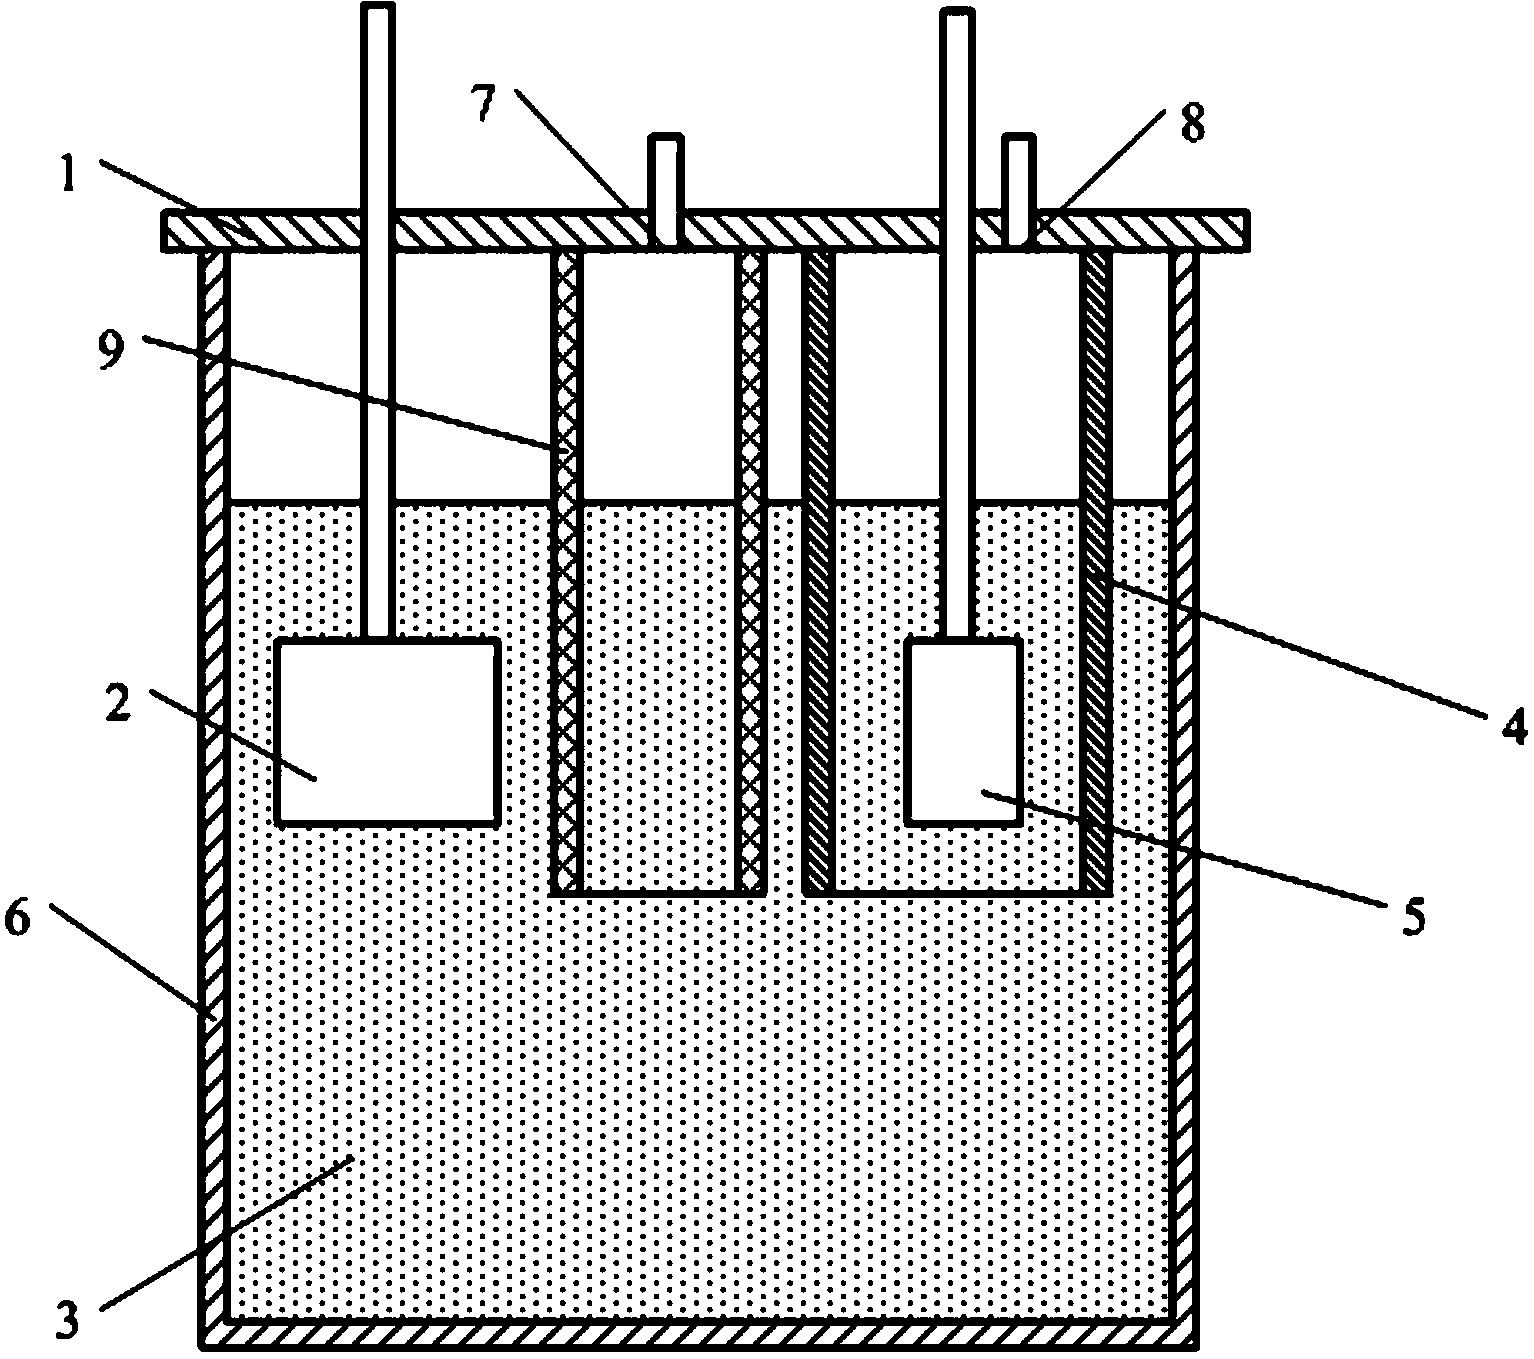 Method for preparing oxygen by electrolyzing carbon dioxide